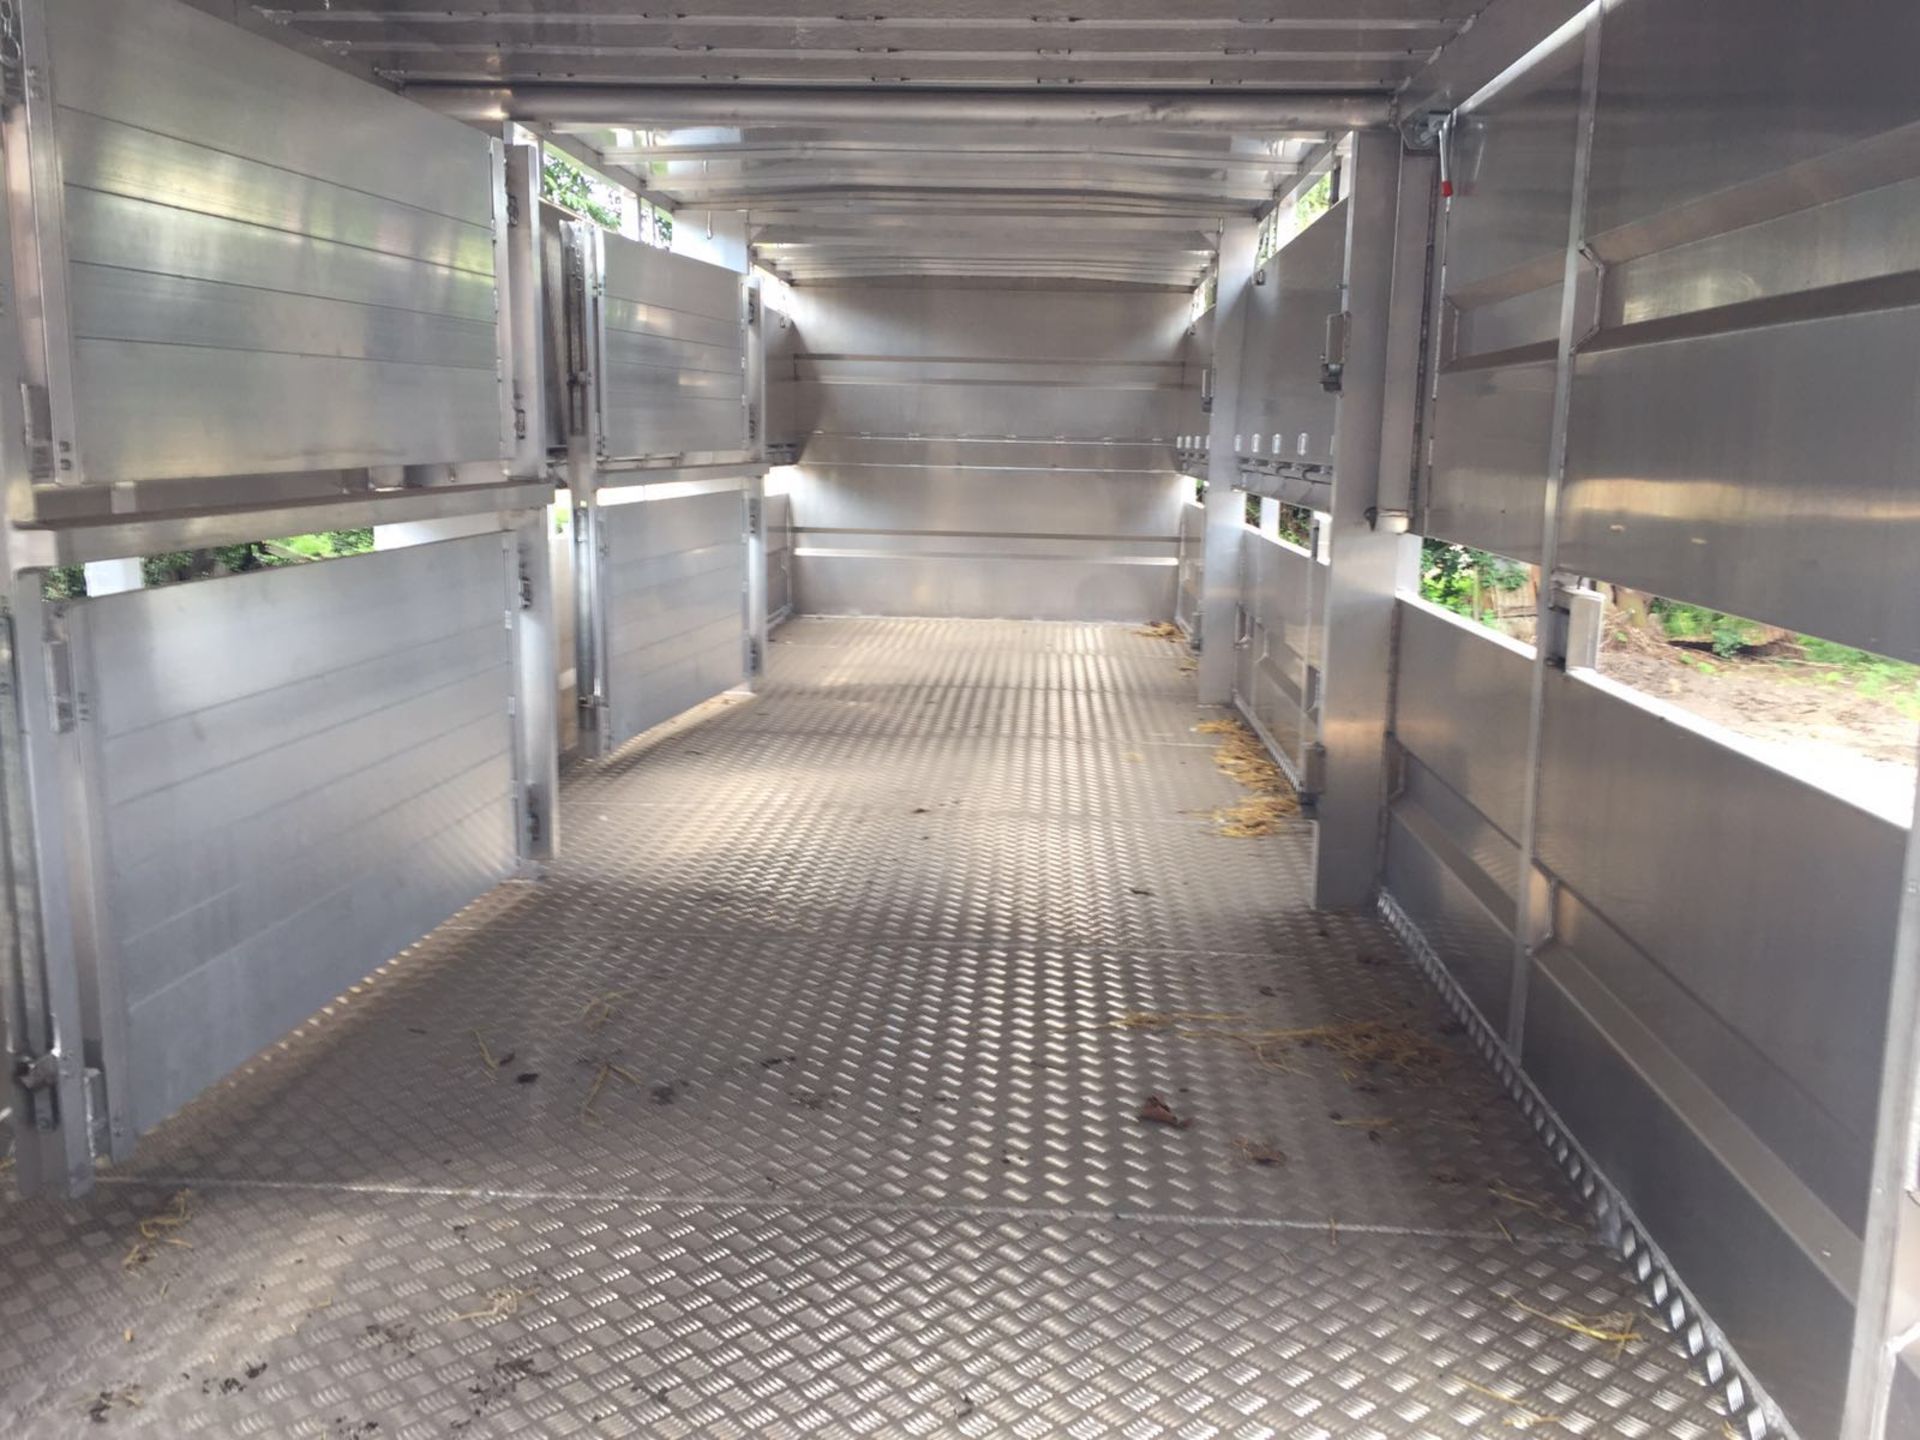 30ft LIVESTOCK TRAILER, CONDITION AS NEW cost £38,000 - Image 7 of 7